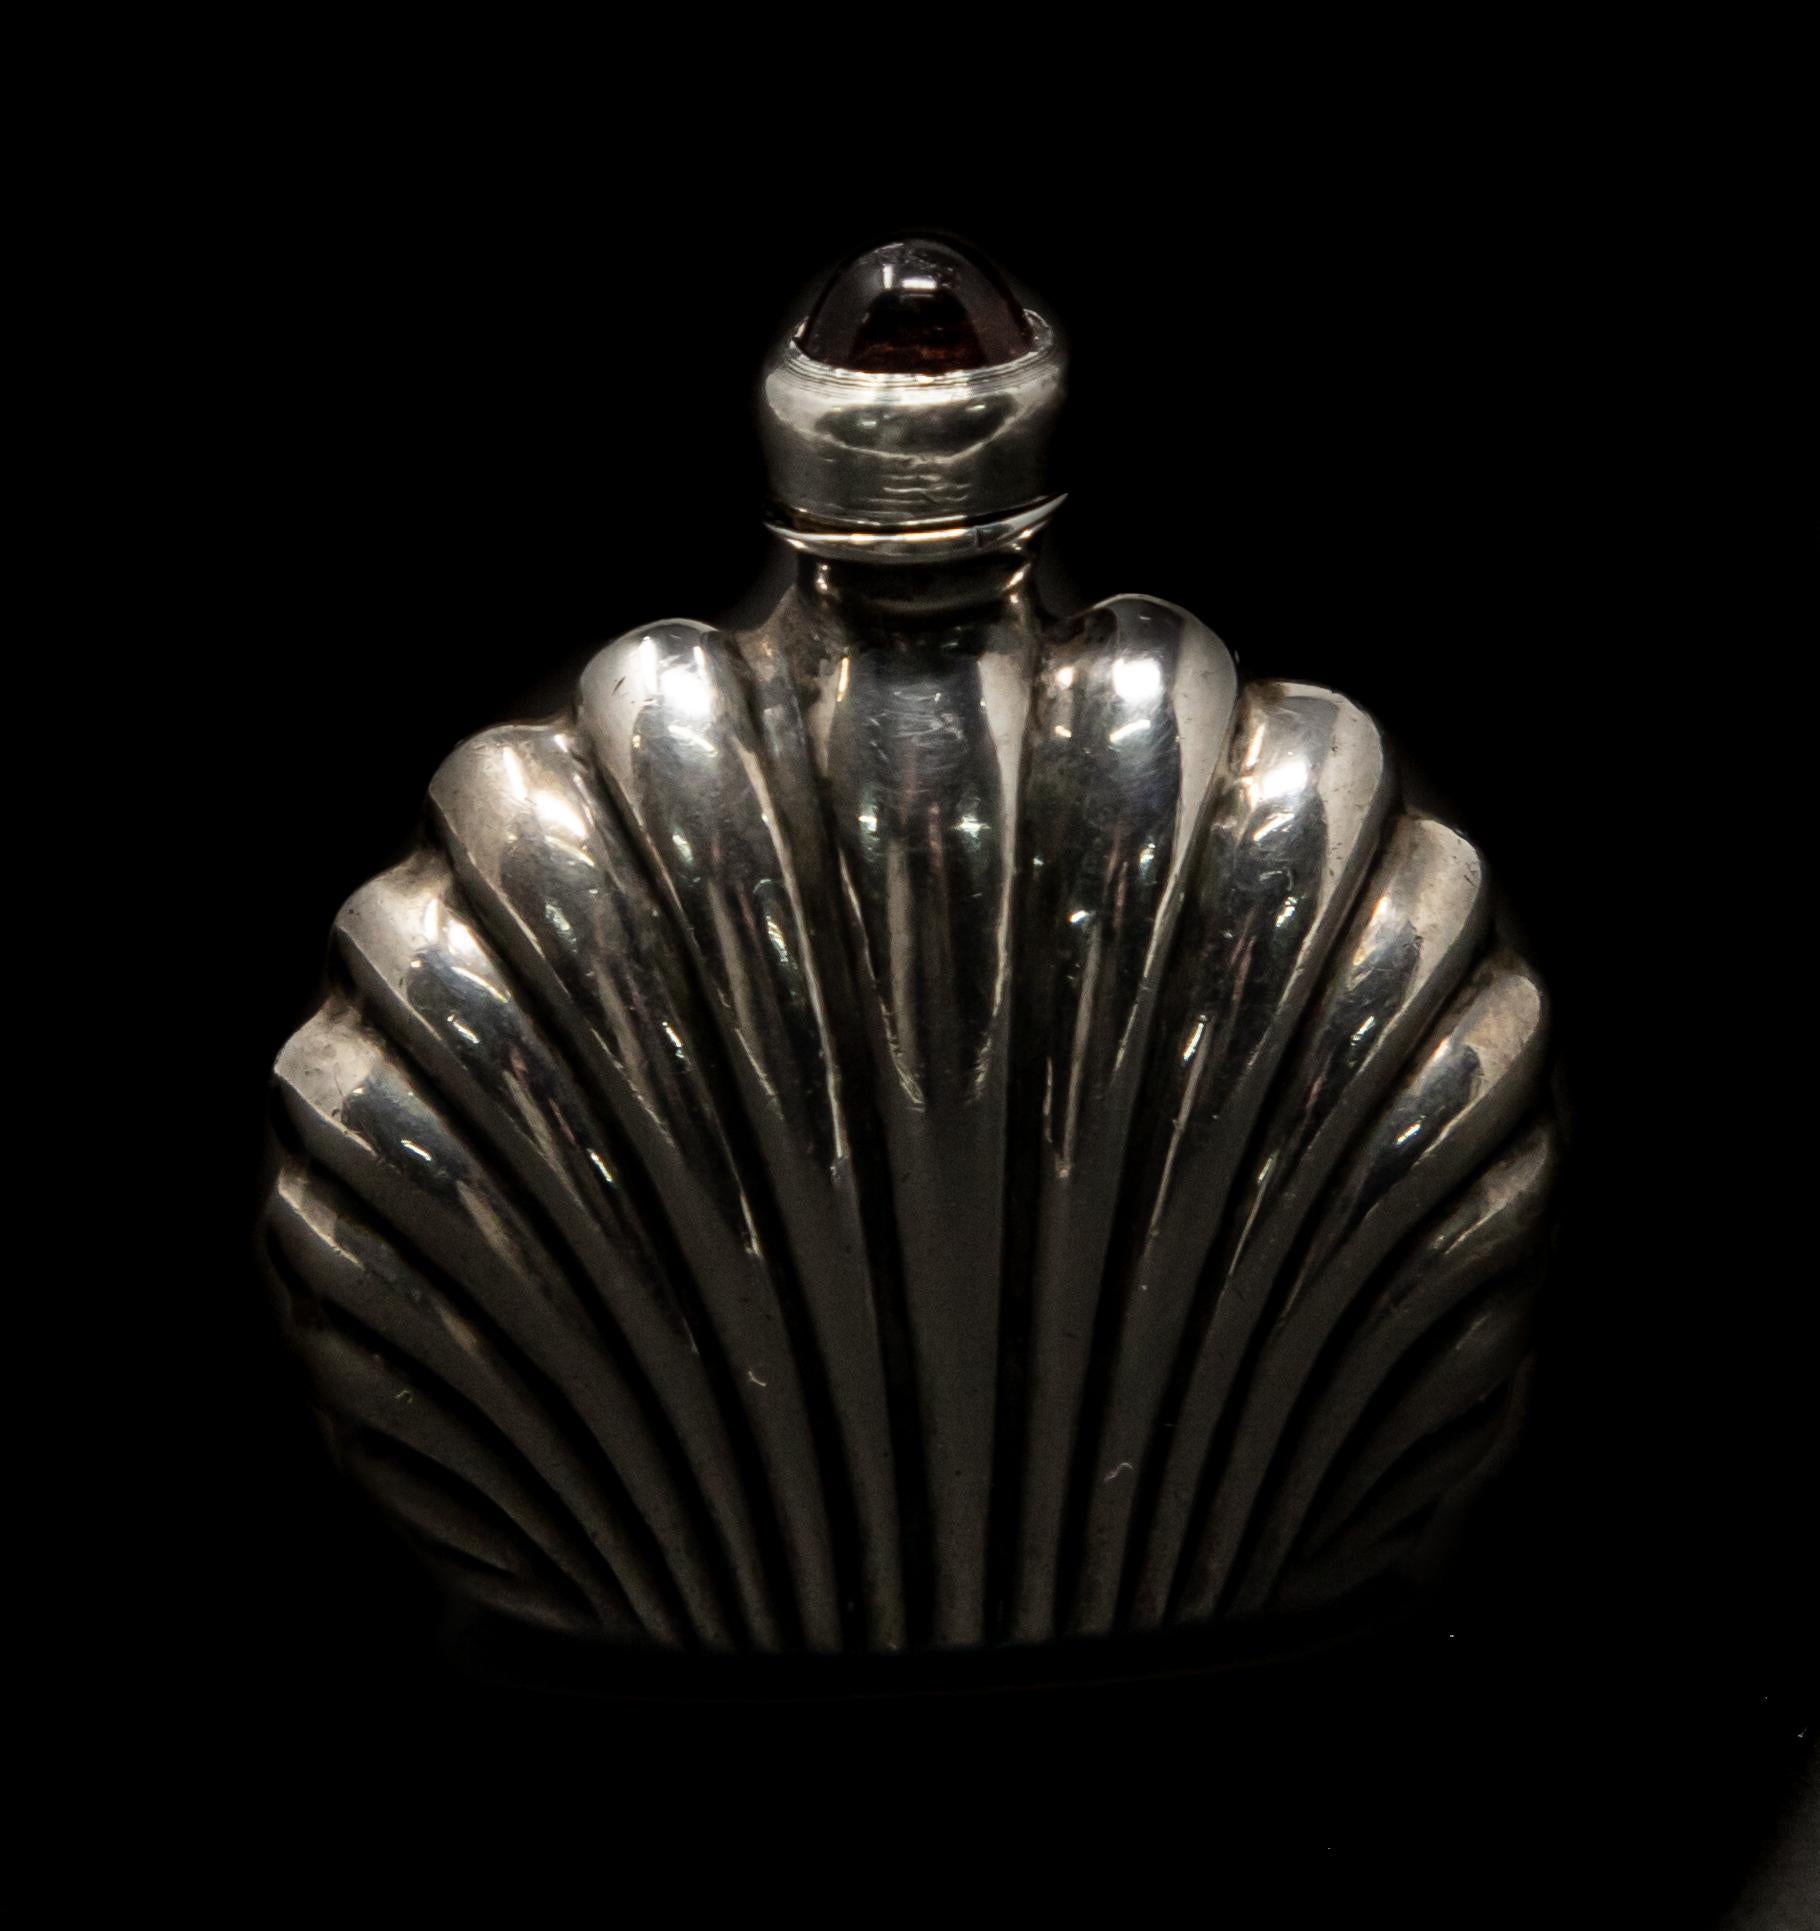 This Art Deco sterling silver perfume bottle is a gorgeous piece. Has a amethyst colored stone on the top. The dipper is threaded so you can open and close.